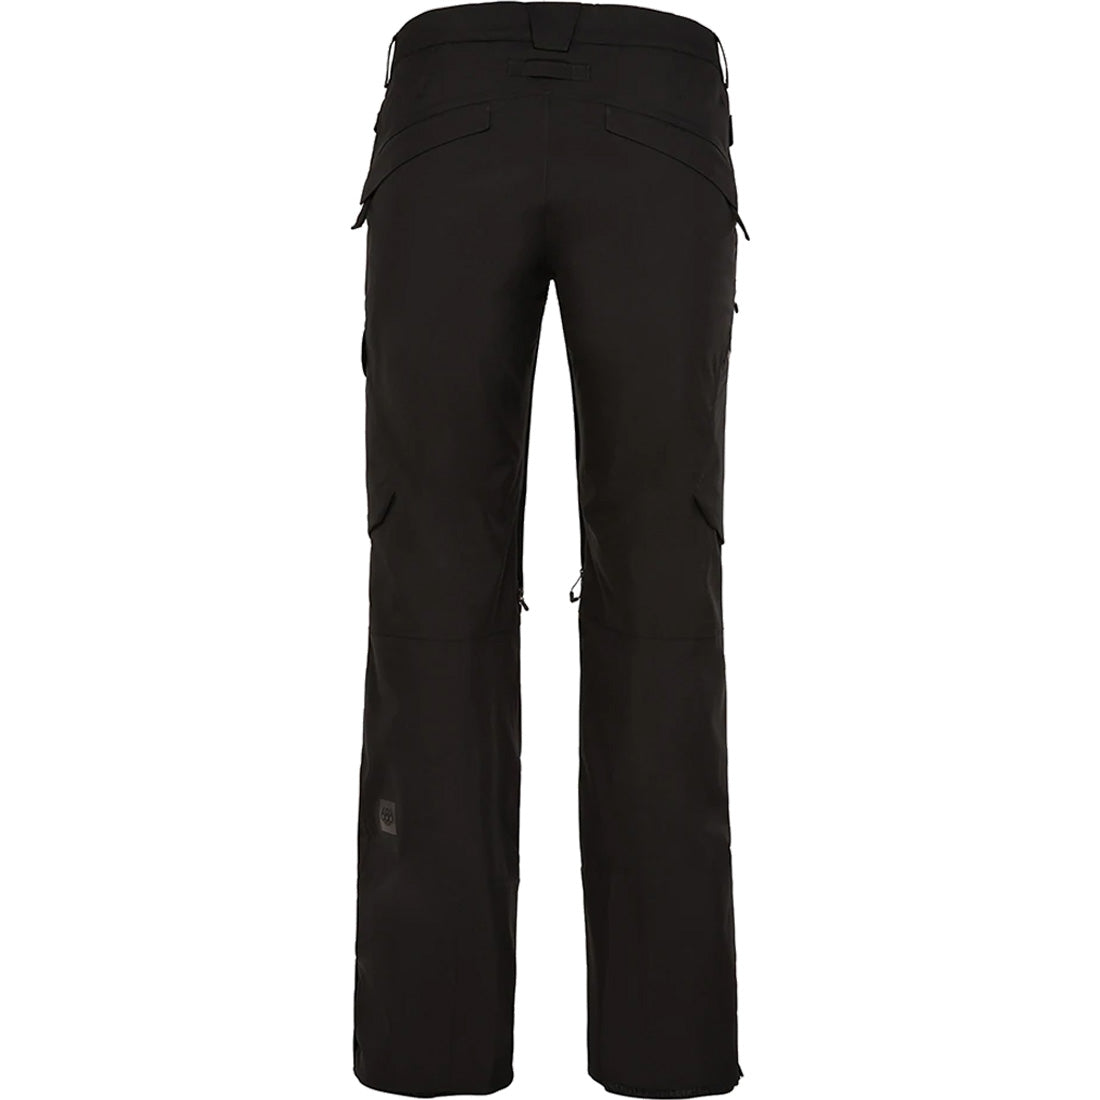 686 Geode Thermagraph Pant - Women's